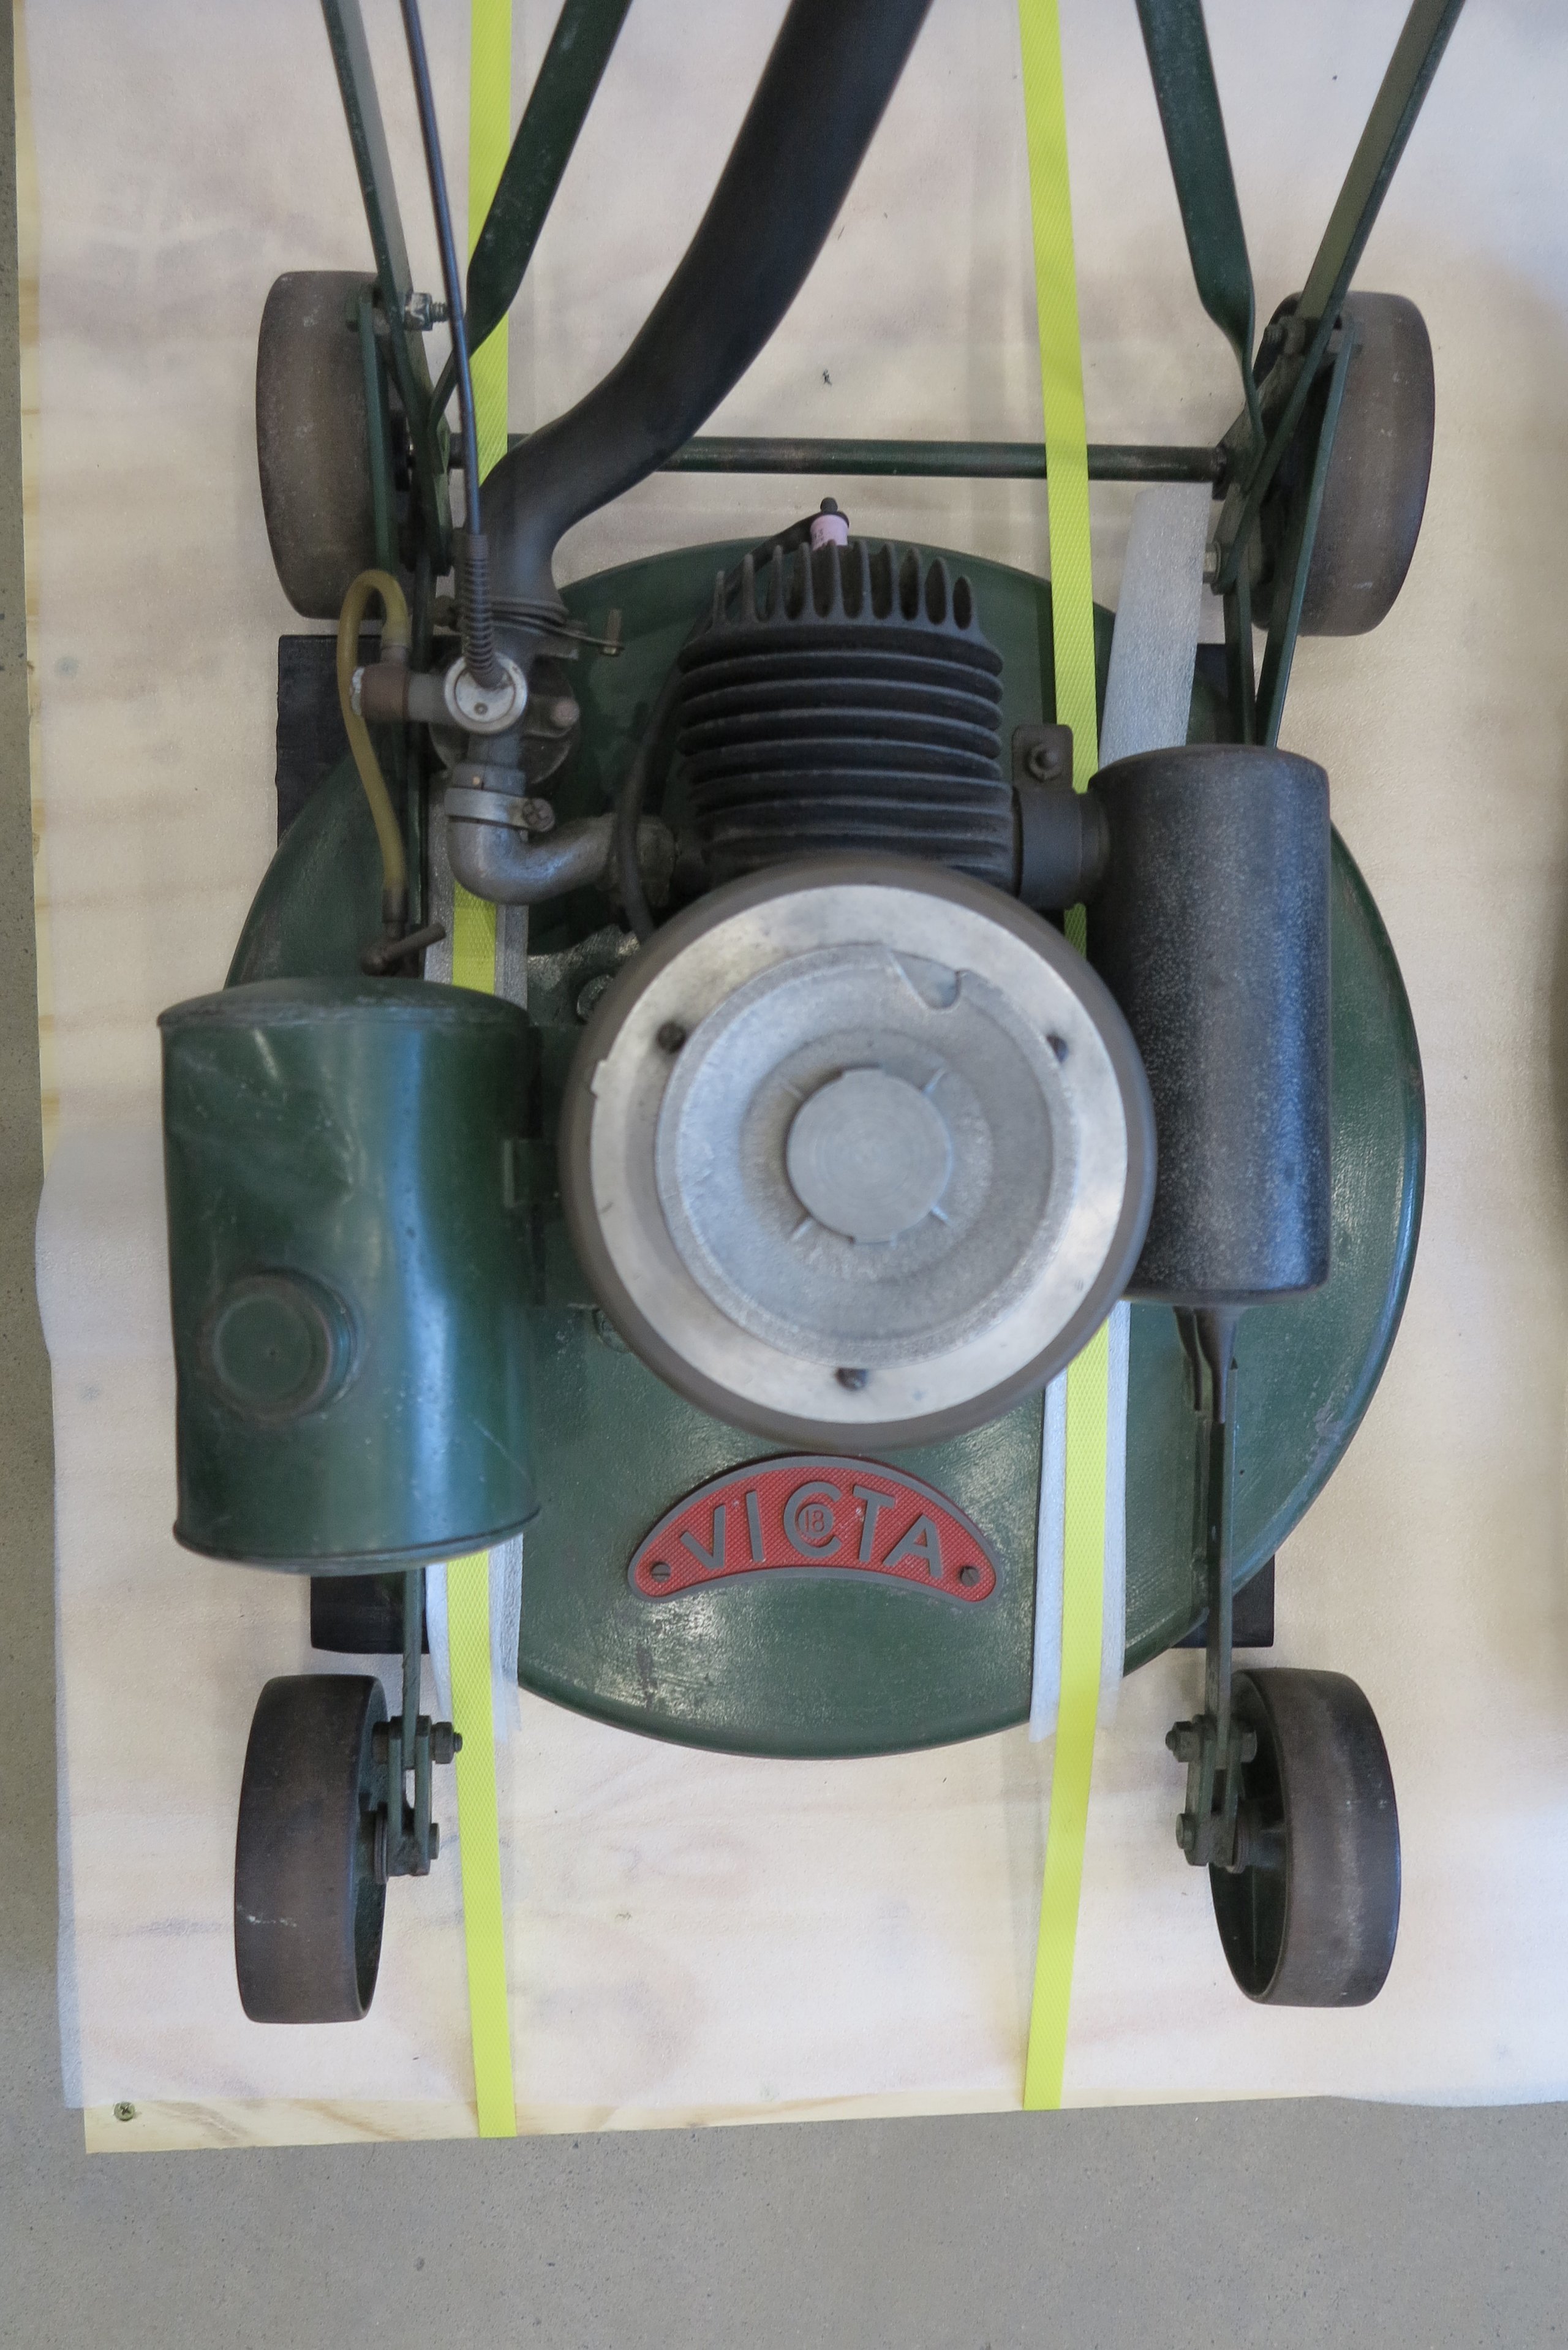 Victa lawnmower, first off the production line